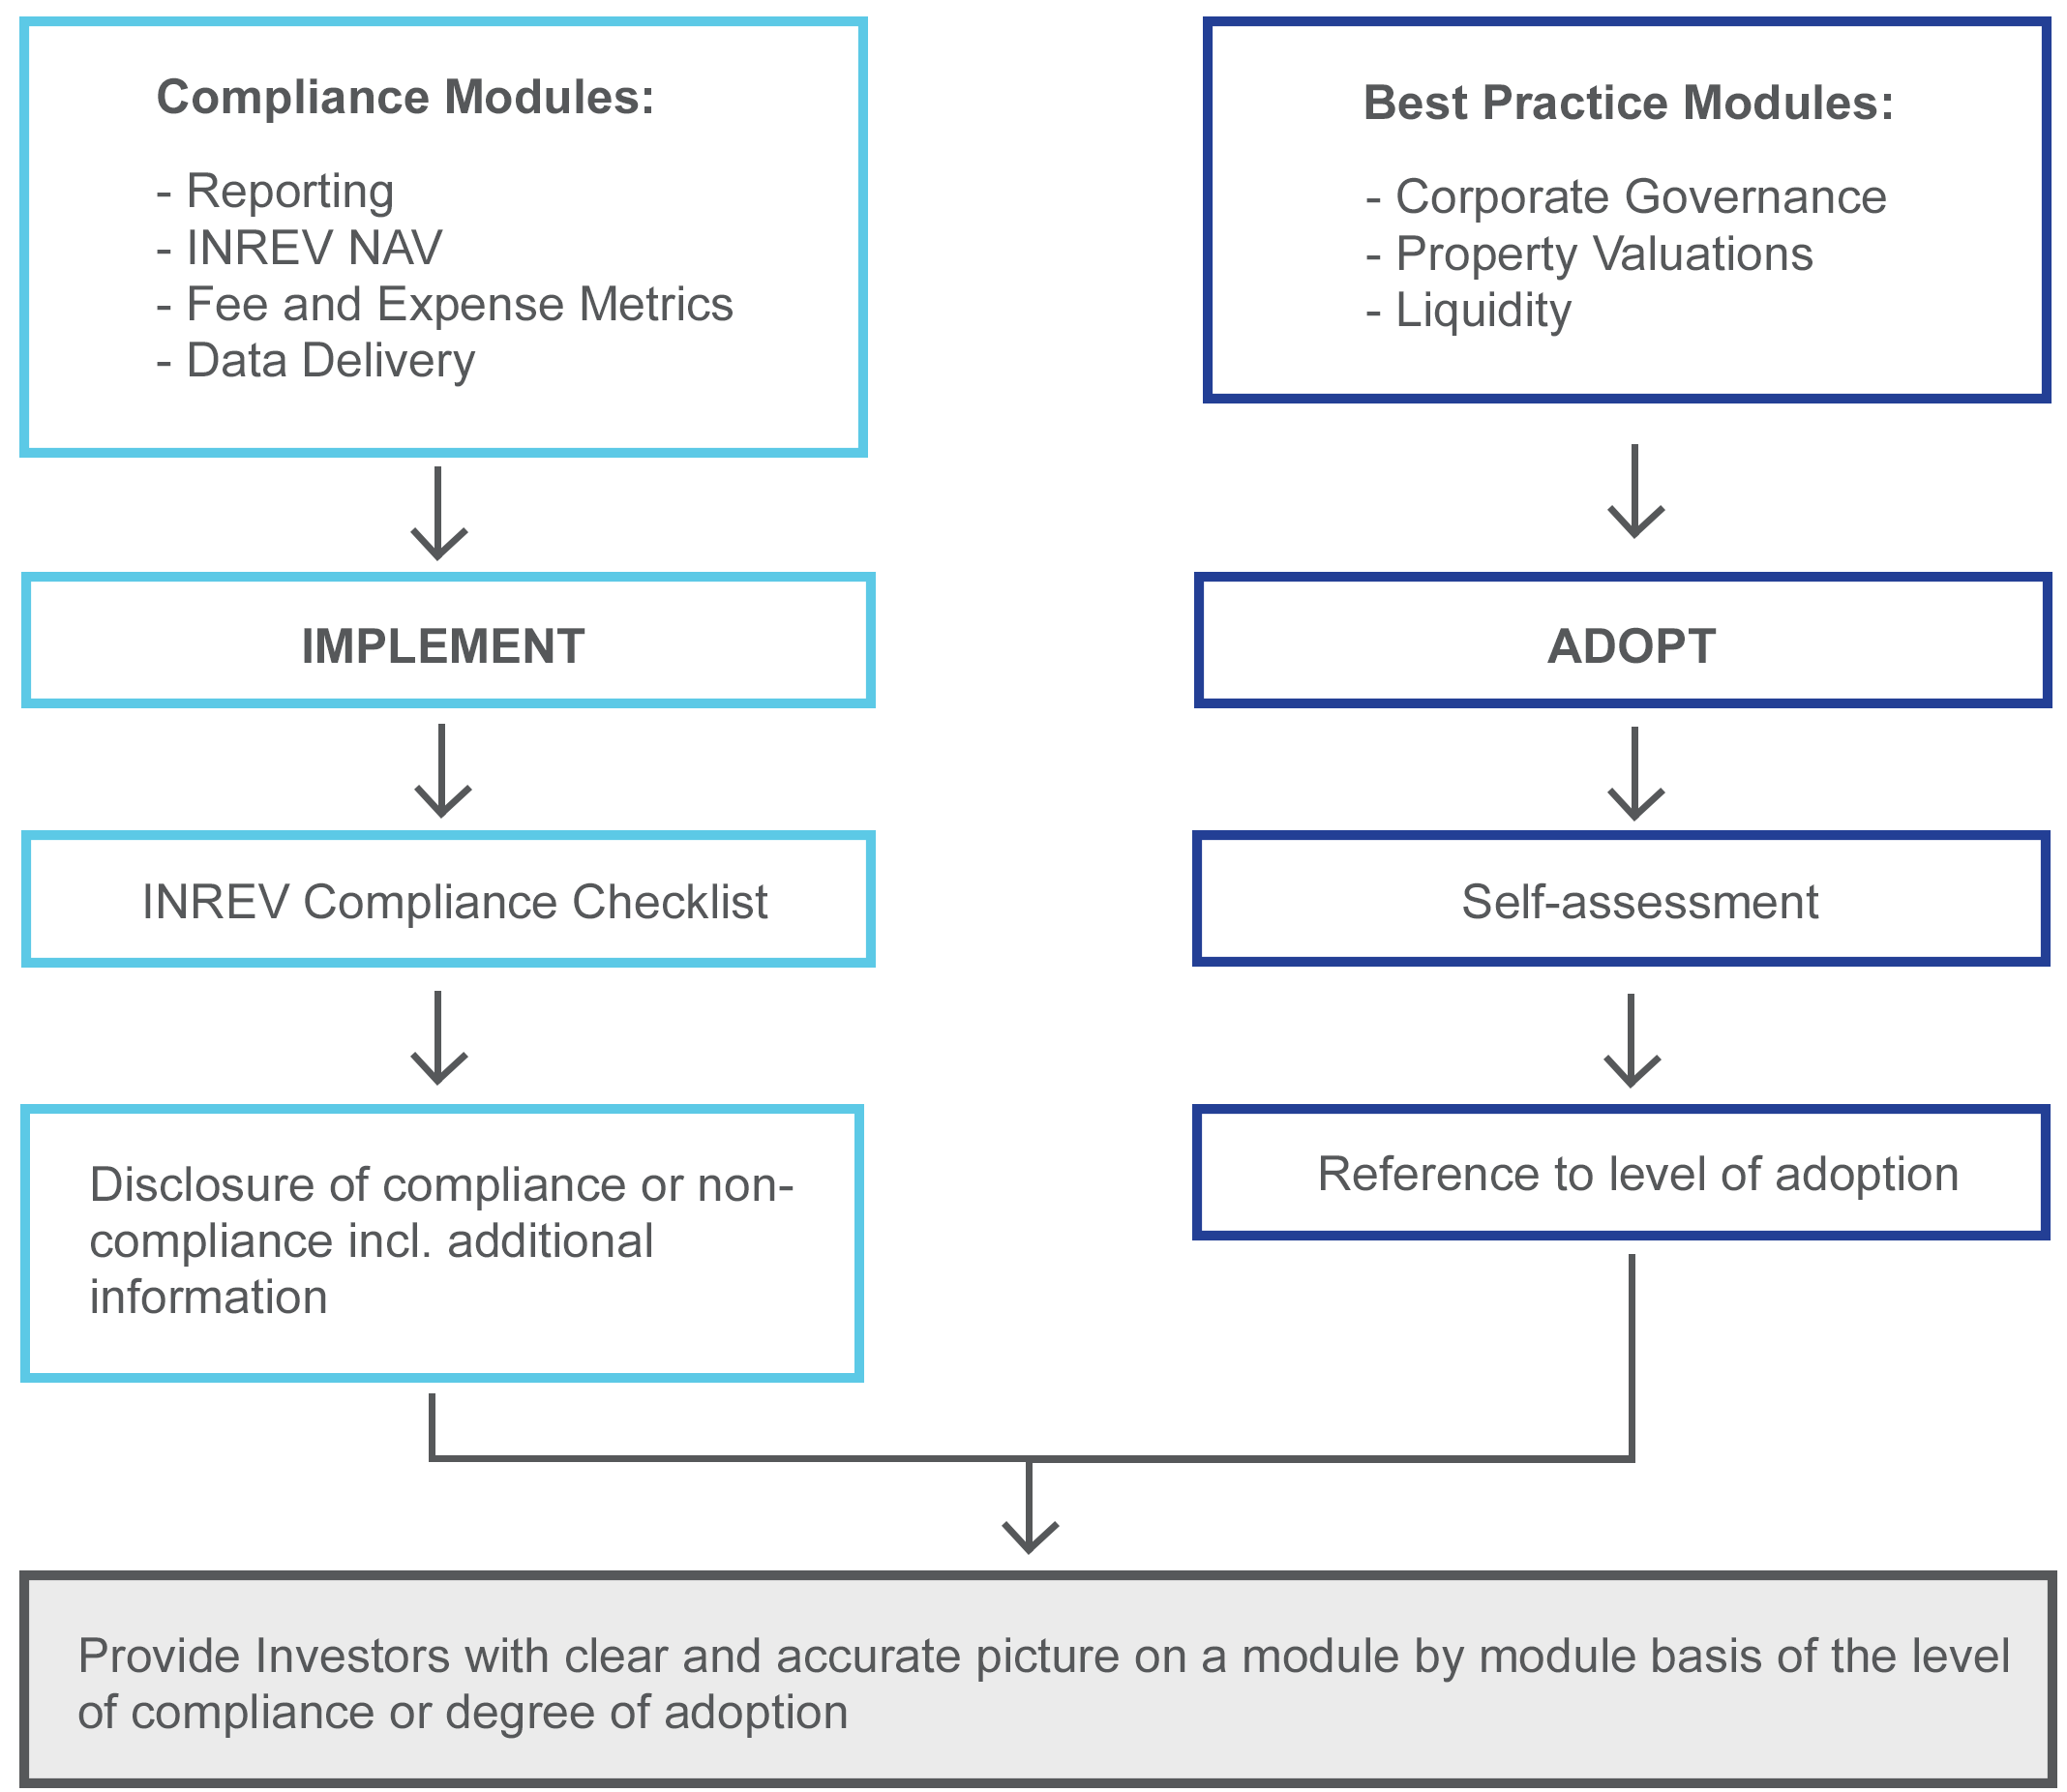 INREV Guidelines overview compliance and best practice modules